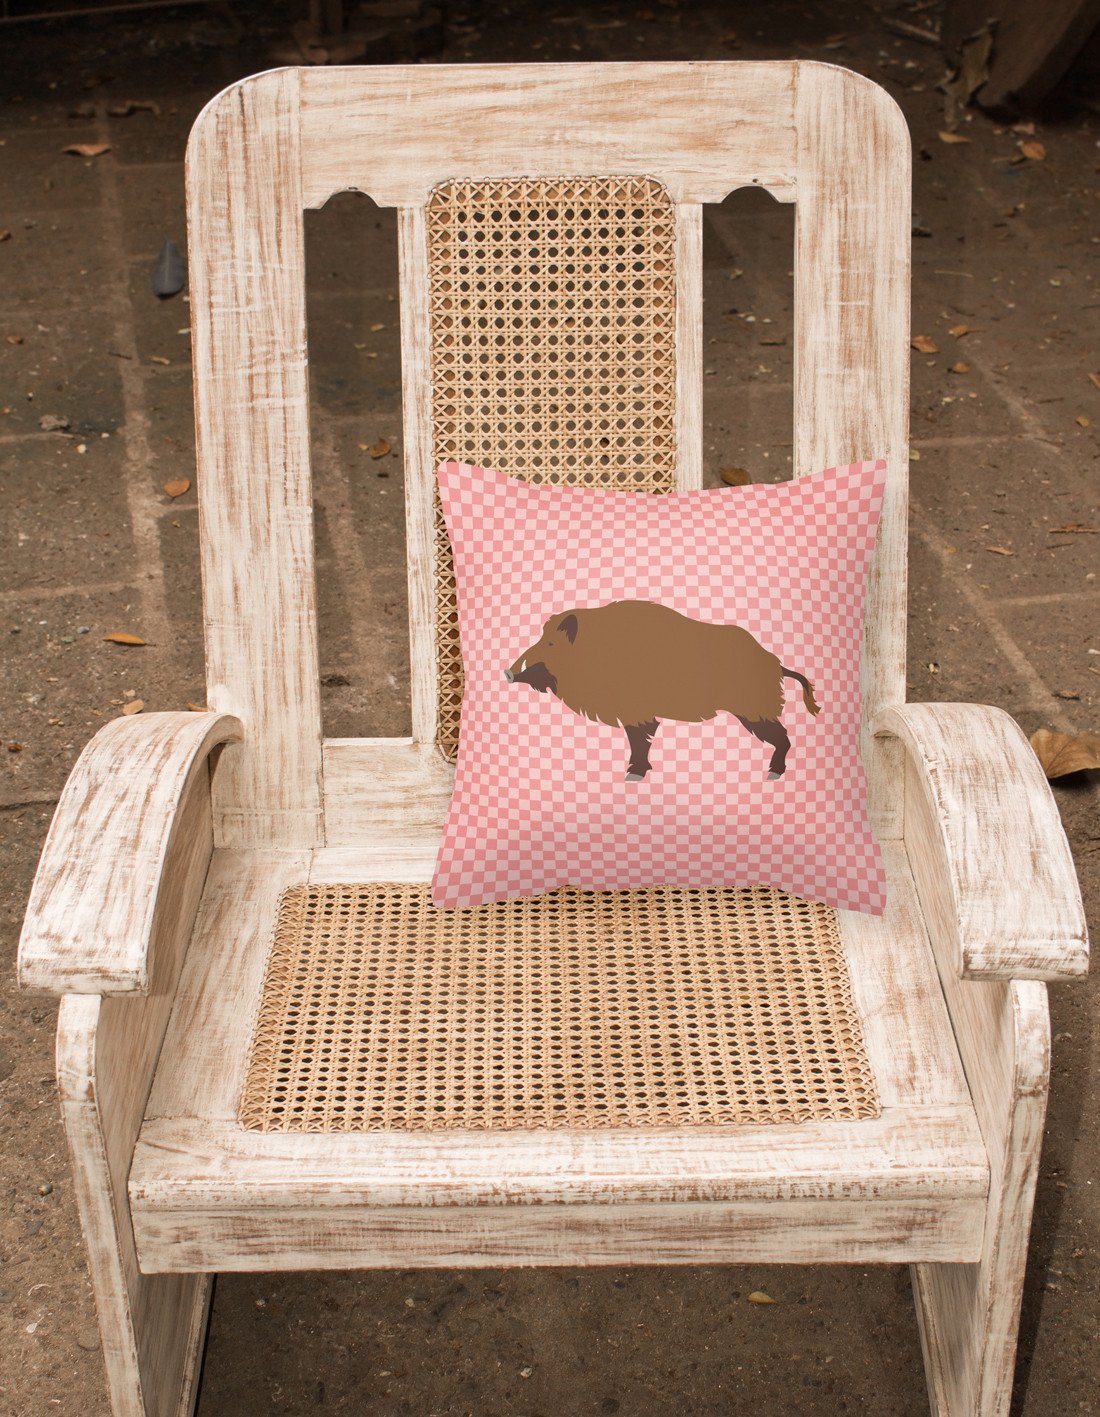 Wild Boar Pig Pink Check Fabric Decorative Pillow BB7936PW1818 by Caroline's Treasures